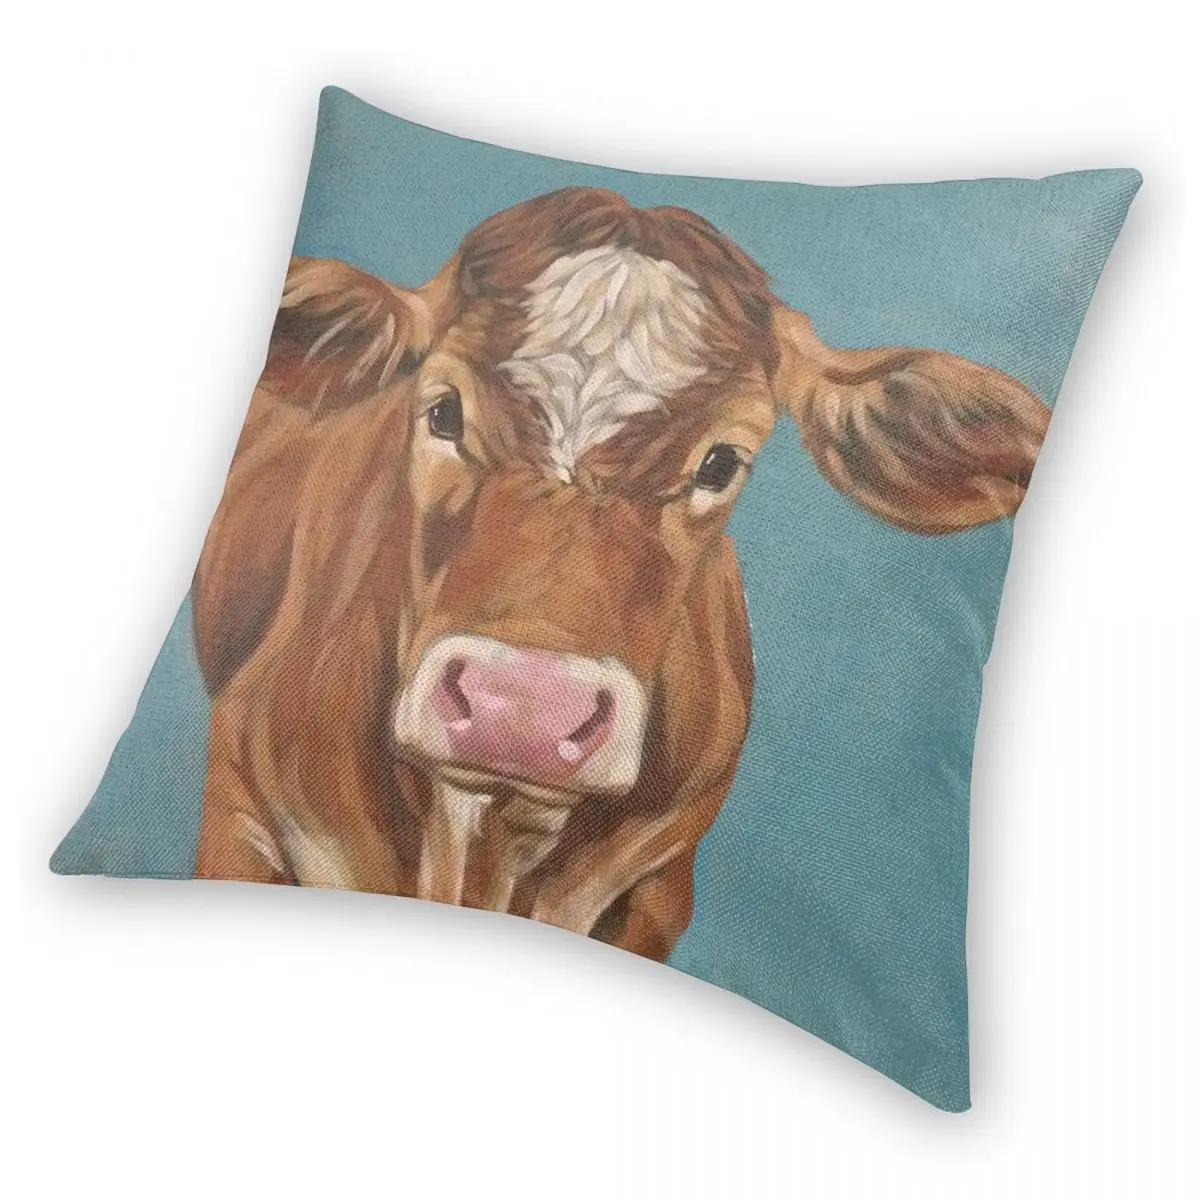 Red Cow On Aqua Square Pillowcase Polyester Linen Velvet Printed Zip Decor Pillow Case Bed Cushion Cover | Дом и сад